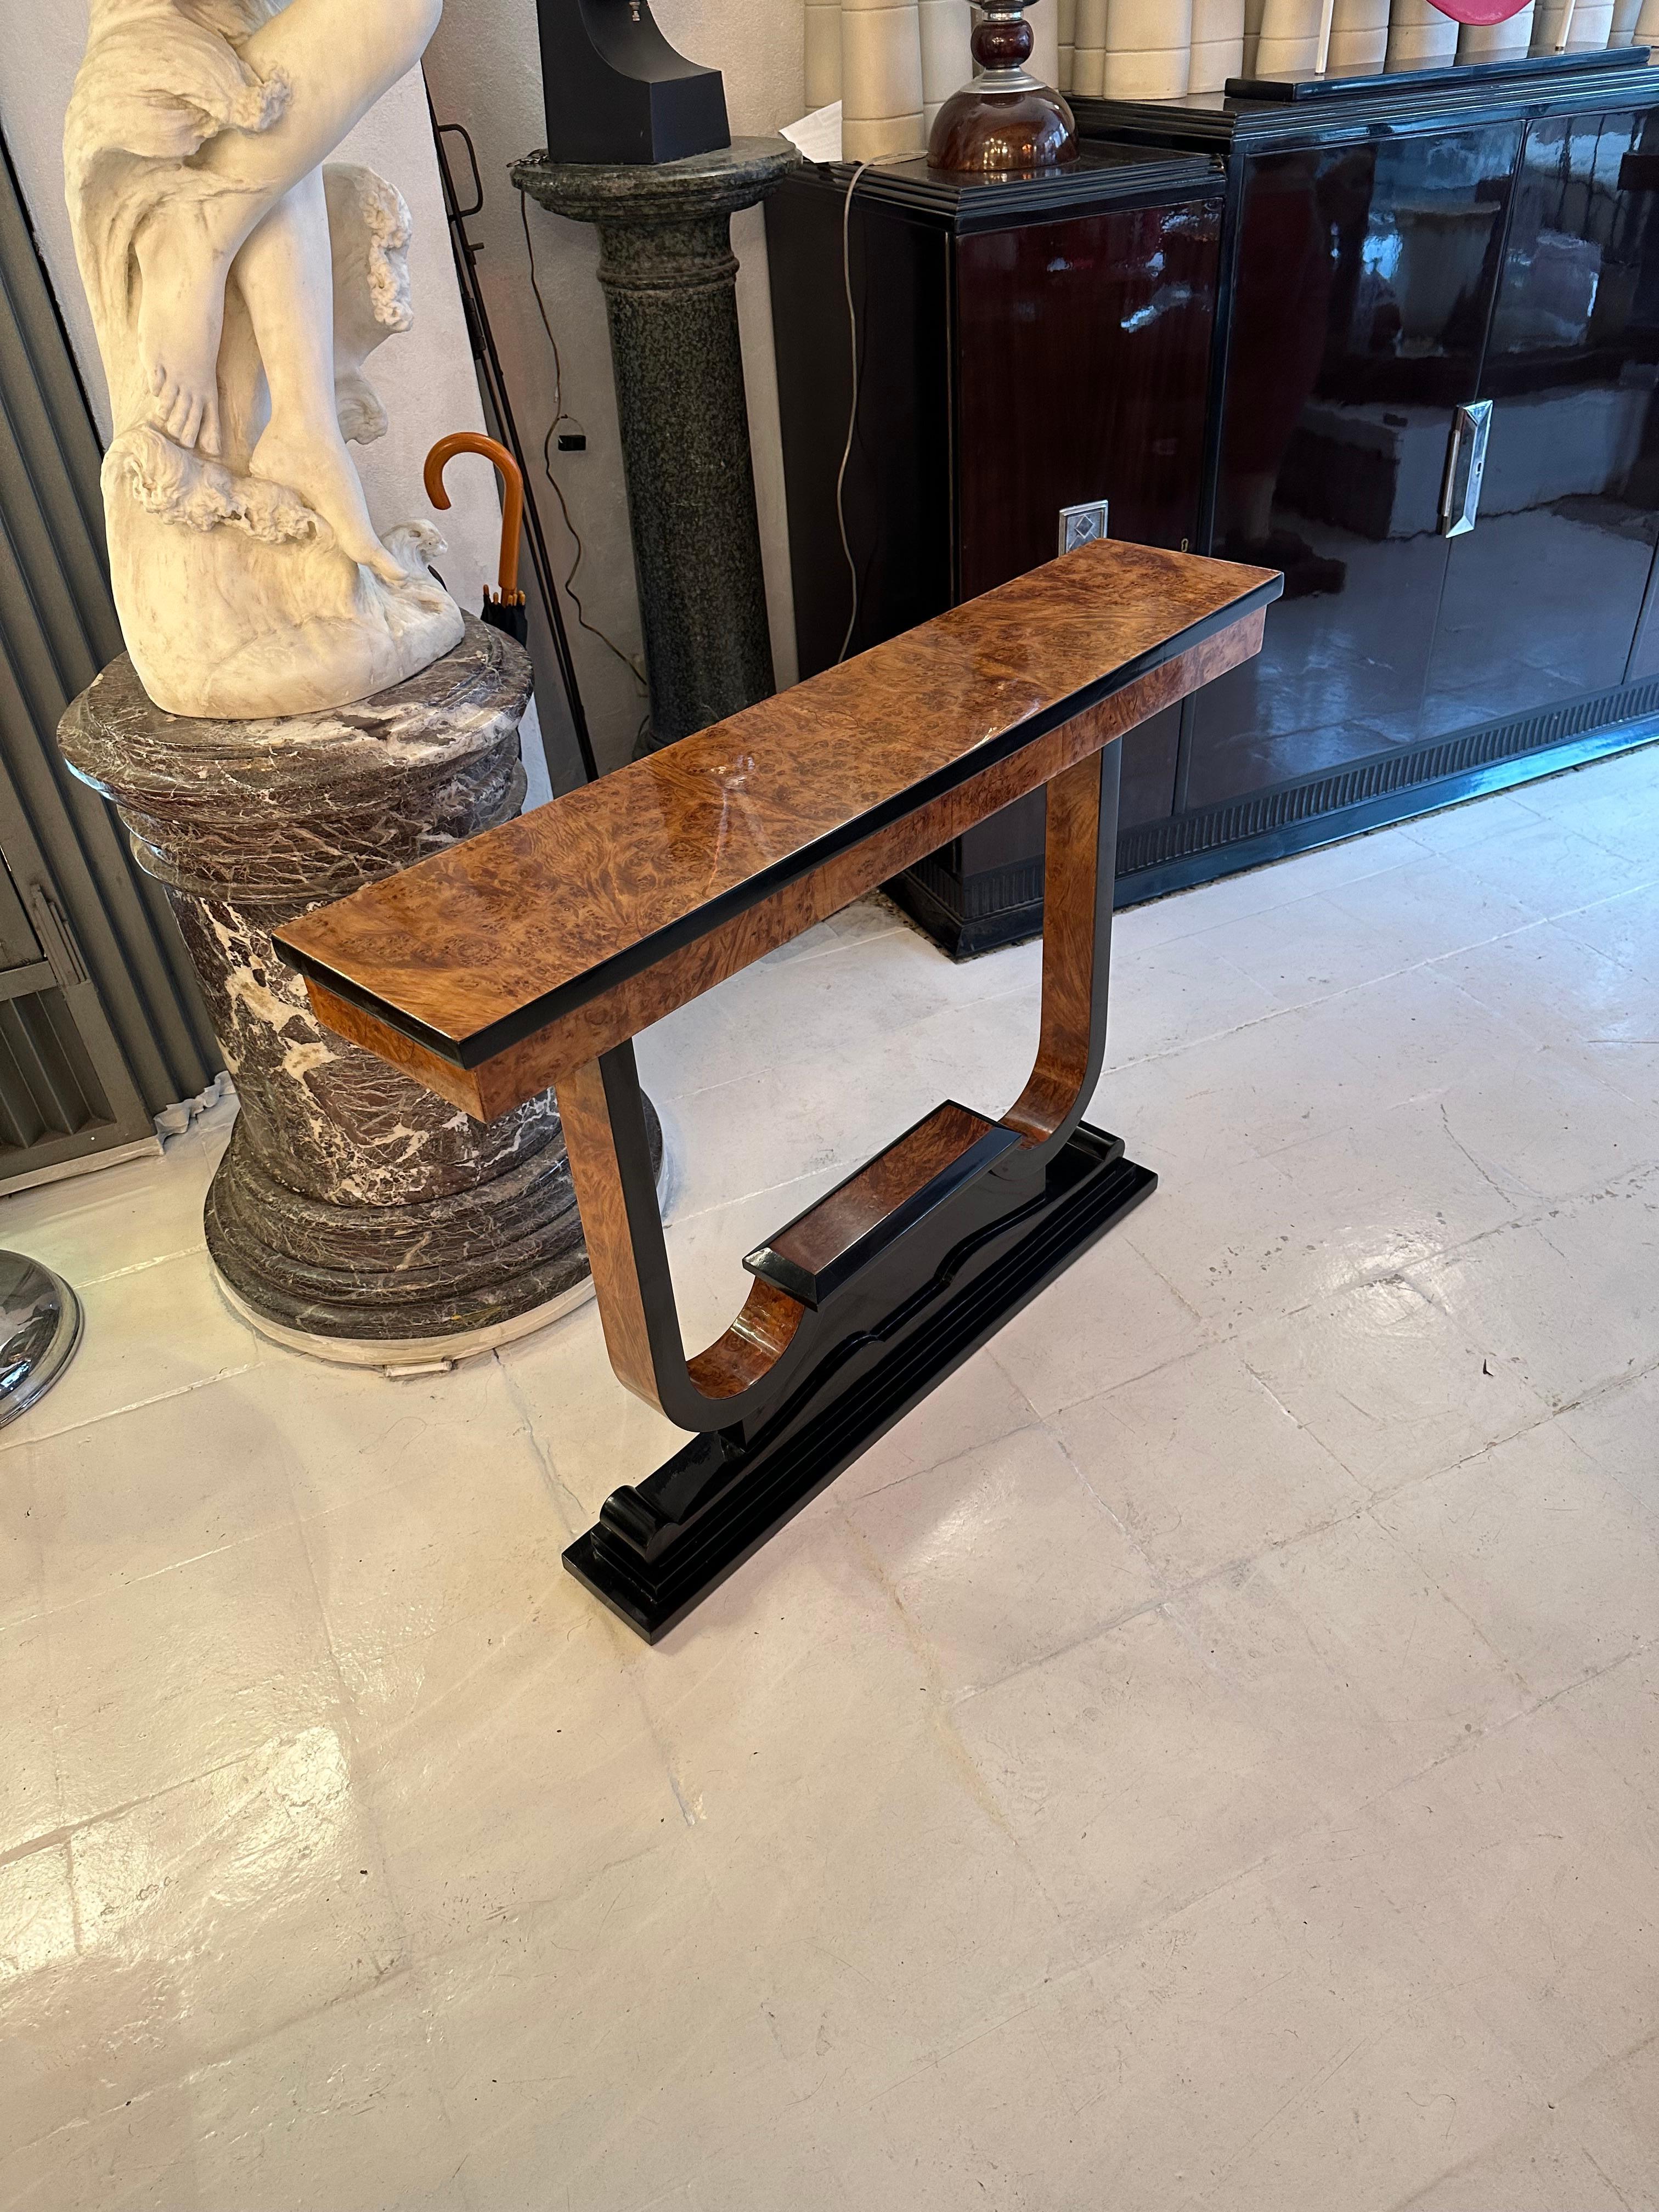 4 consoles
Material: wood 
Style: Art Deco
Country: France
If you want to live in the golden years, this is the tables that your project needs.
We have specialized in the sale of Art Deco and Art Nouveau and Vintage styles since 1982. If you have